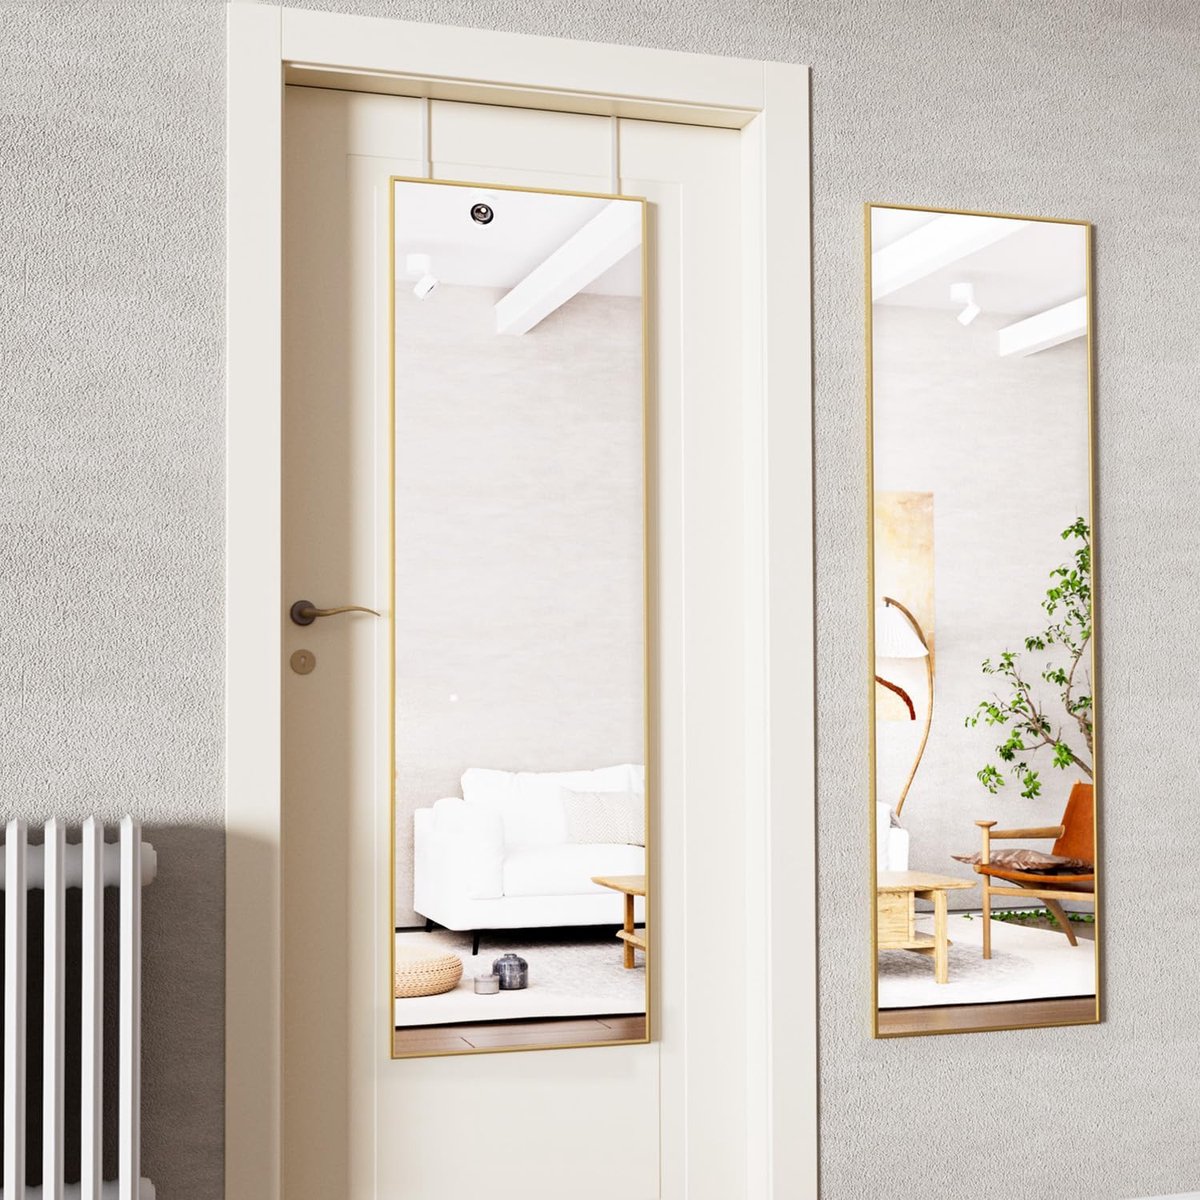 Door Mirror, Full Length Mirror, 35 x 122 cm Wall Mirror with 2 Height-Adjustable Hanging Hooks Over the Door, Hanging Mirror with Aluminium Frame for Entrances and Bedrooms, Gold - 